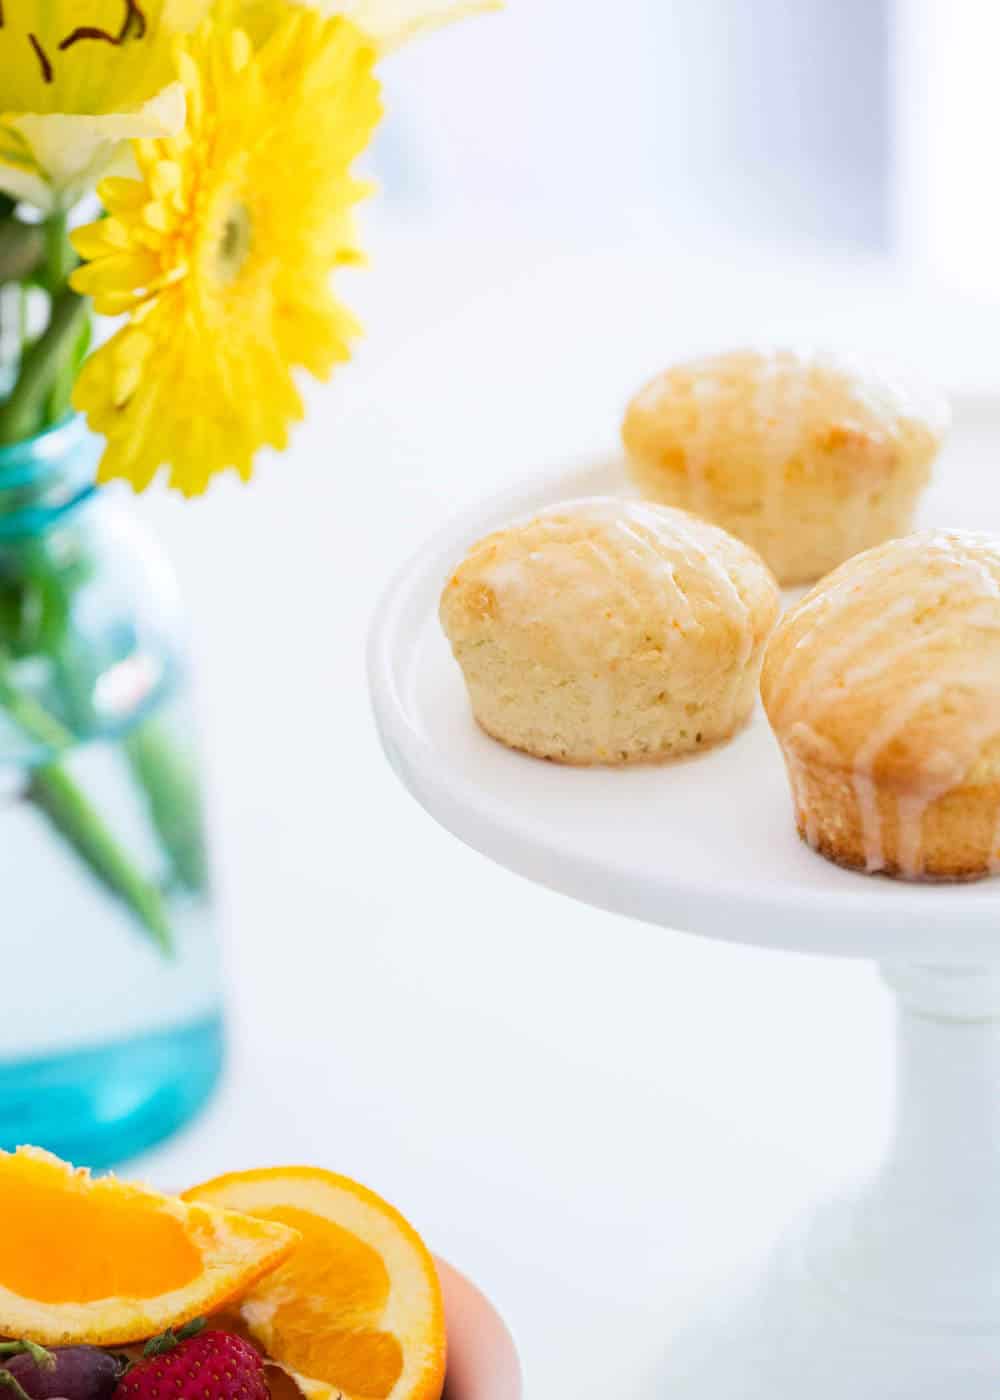 orange muffins on a cake stand next to a vase of yellow flowers 